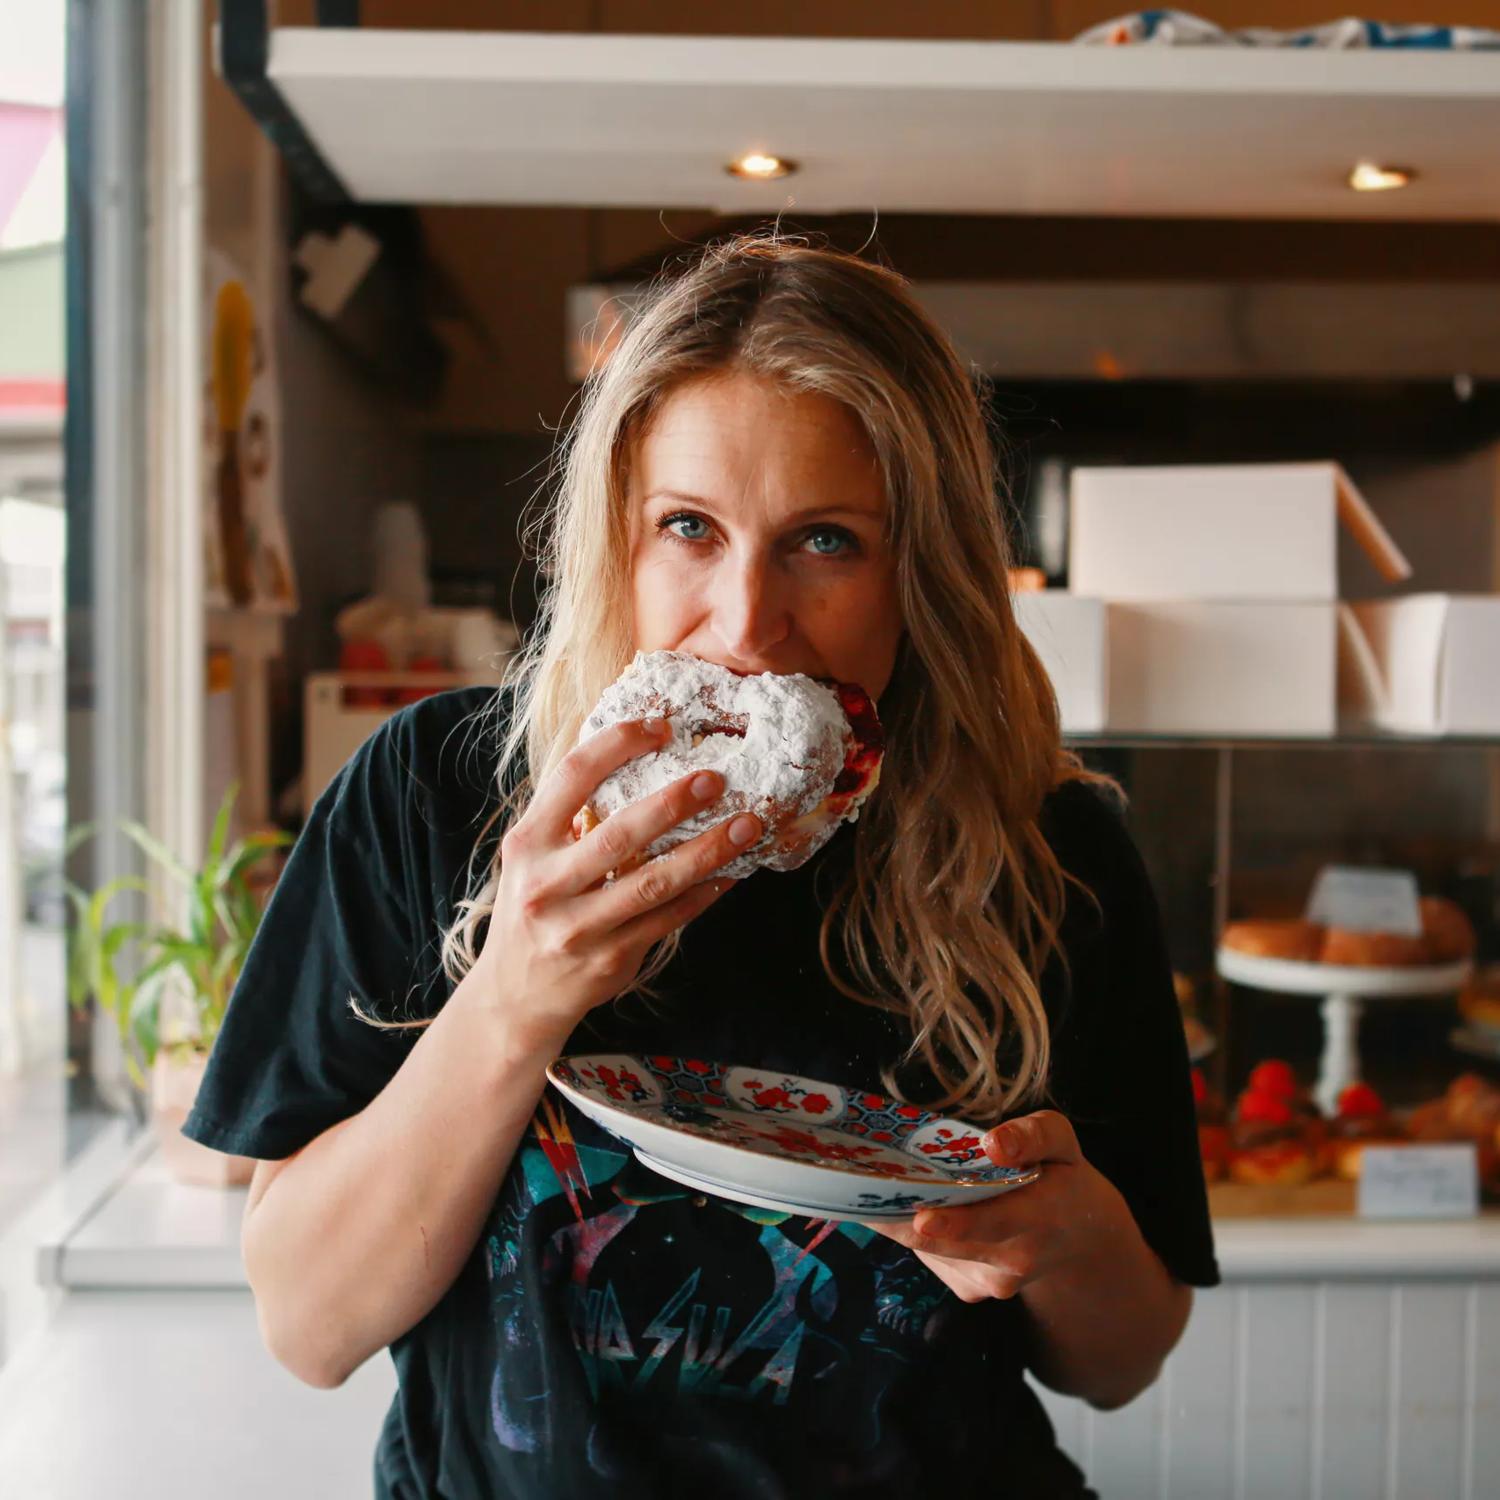 A person wearing a black tee shirt is biting into a powdered pastry and holding a plate in their other hand at Tomboy bakery in  Mount Victoria in Wellington. 